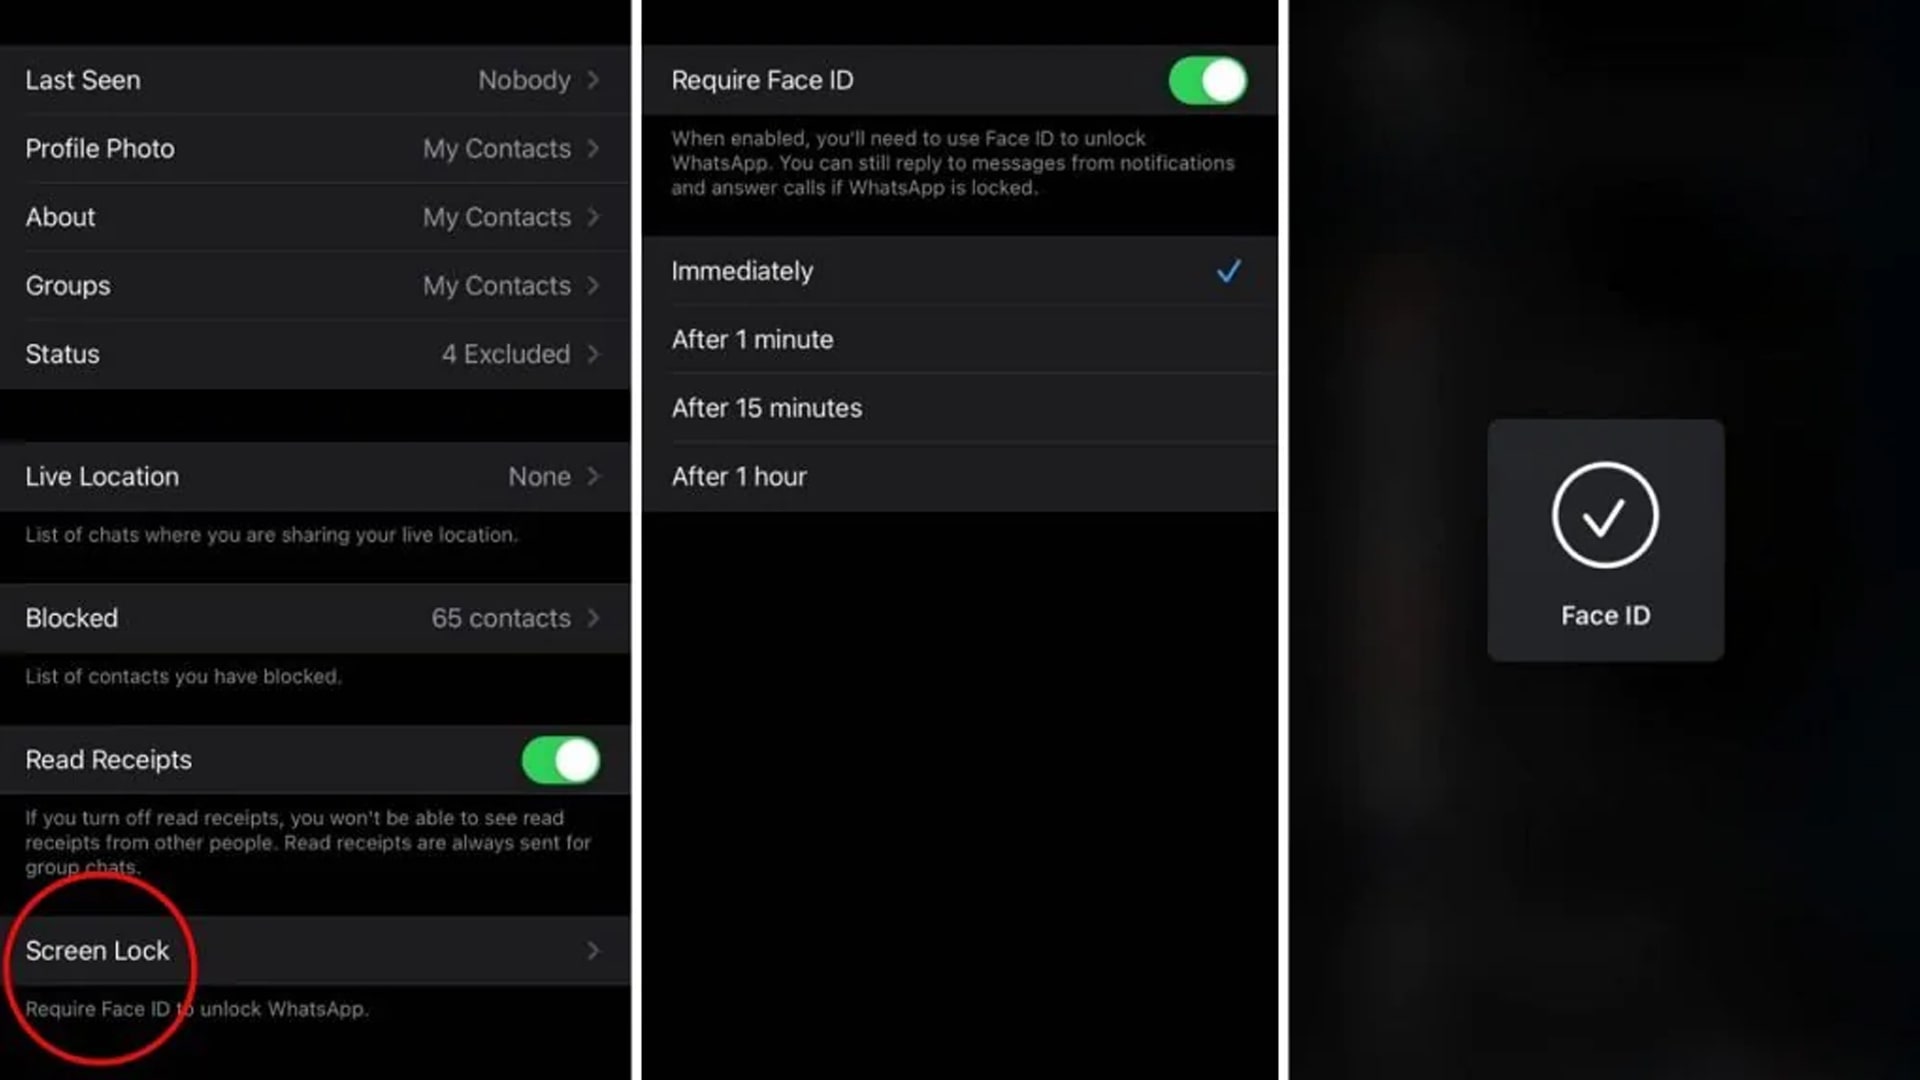 How to lock WhatsApp on iPhone using Face ID